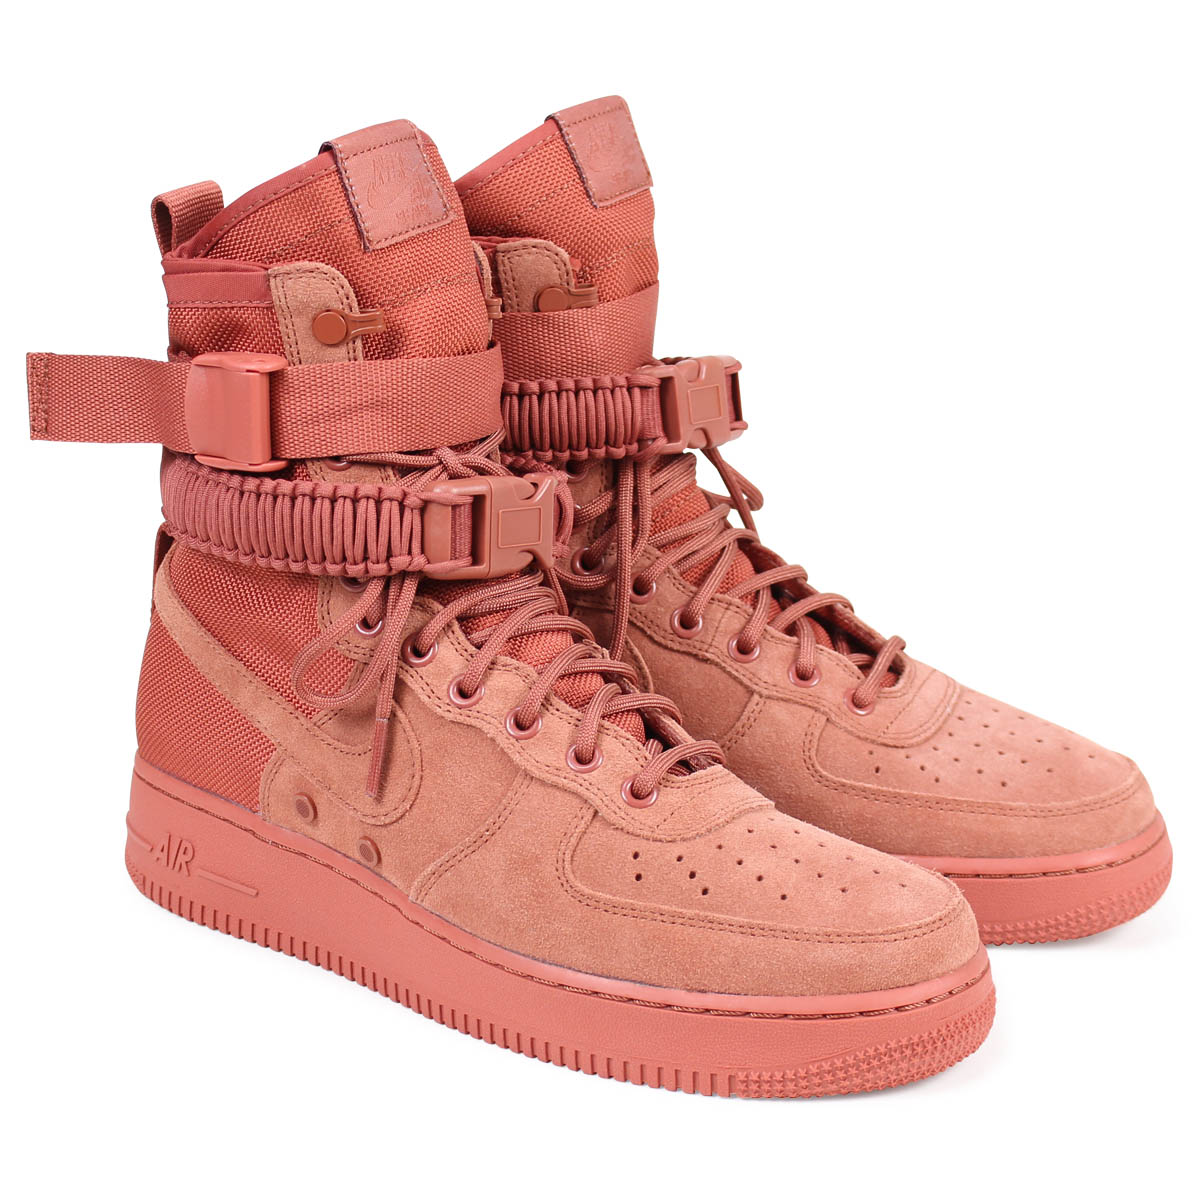 nike air force 1 dusty pink cheap online